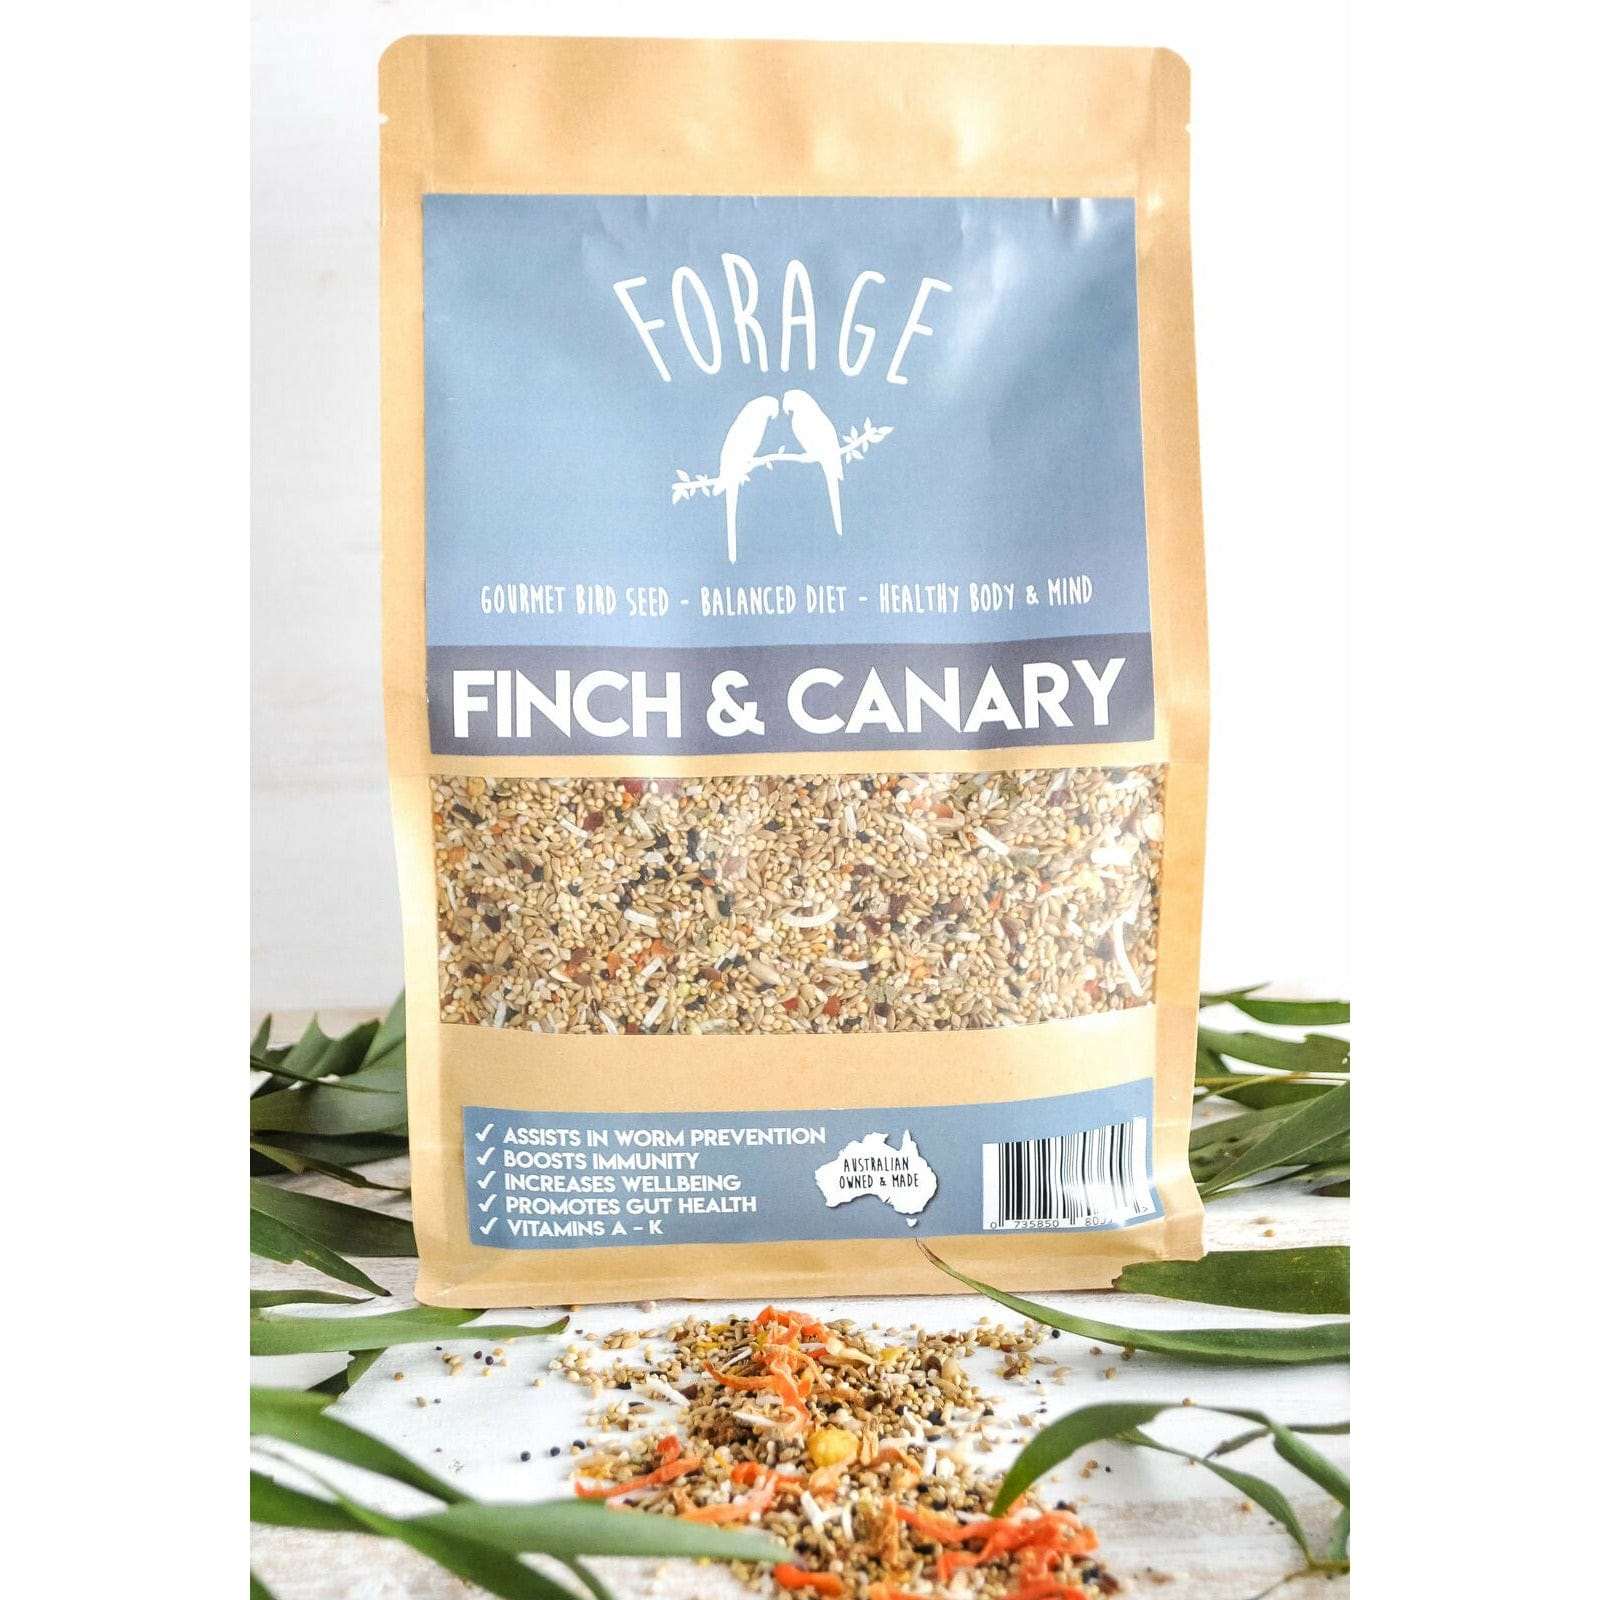 Forage Finch & Canary Mix (Excl. TAS & WA) from Forage Gourmet Seed